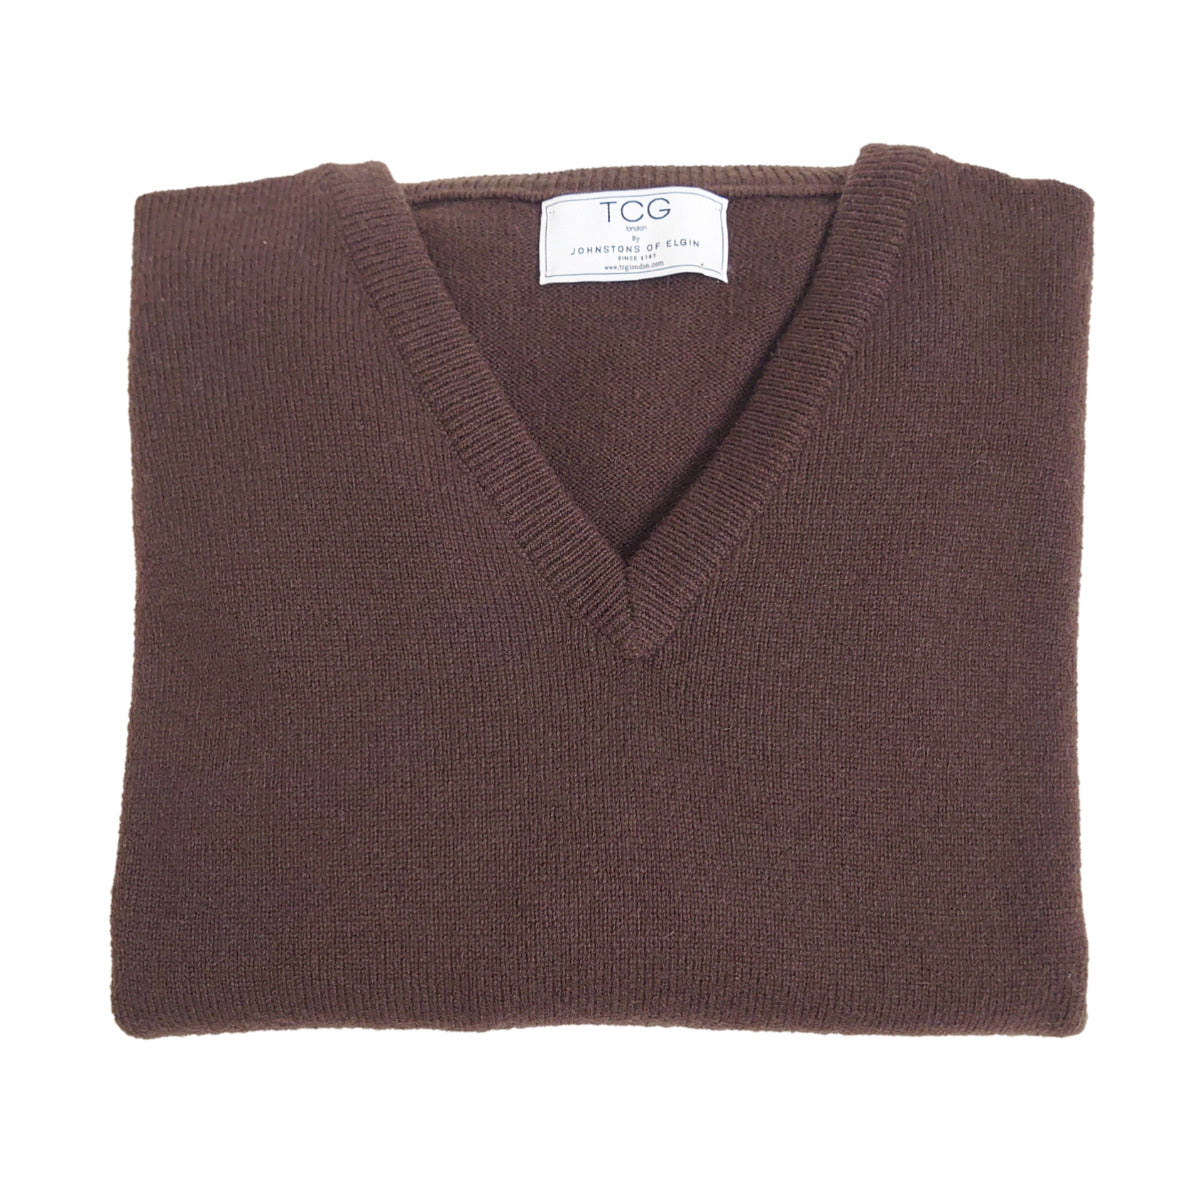 Men's Relaxed Fit V-Neck 100% Pure Cashmere Jumper - Dark Brown - XXL